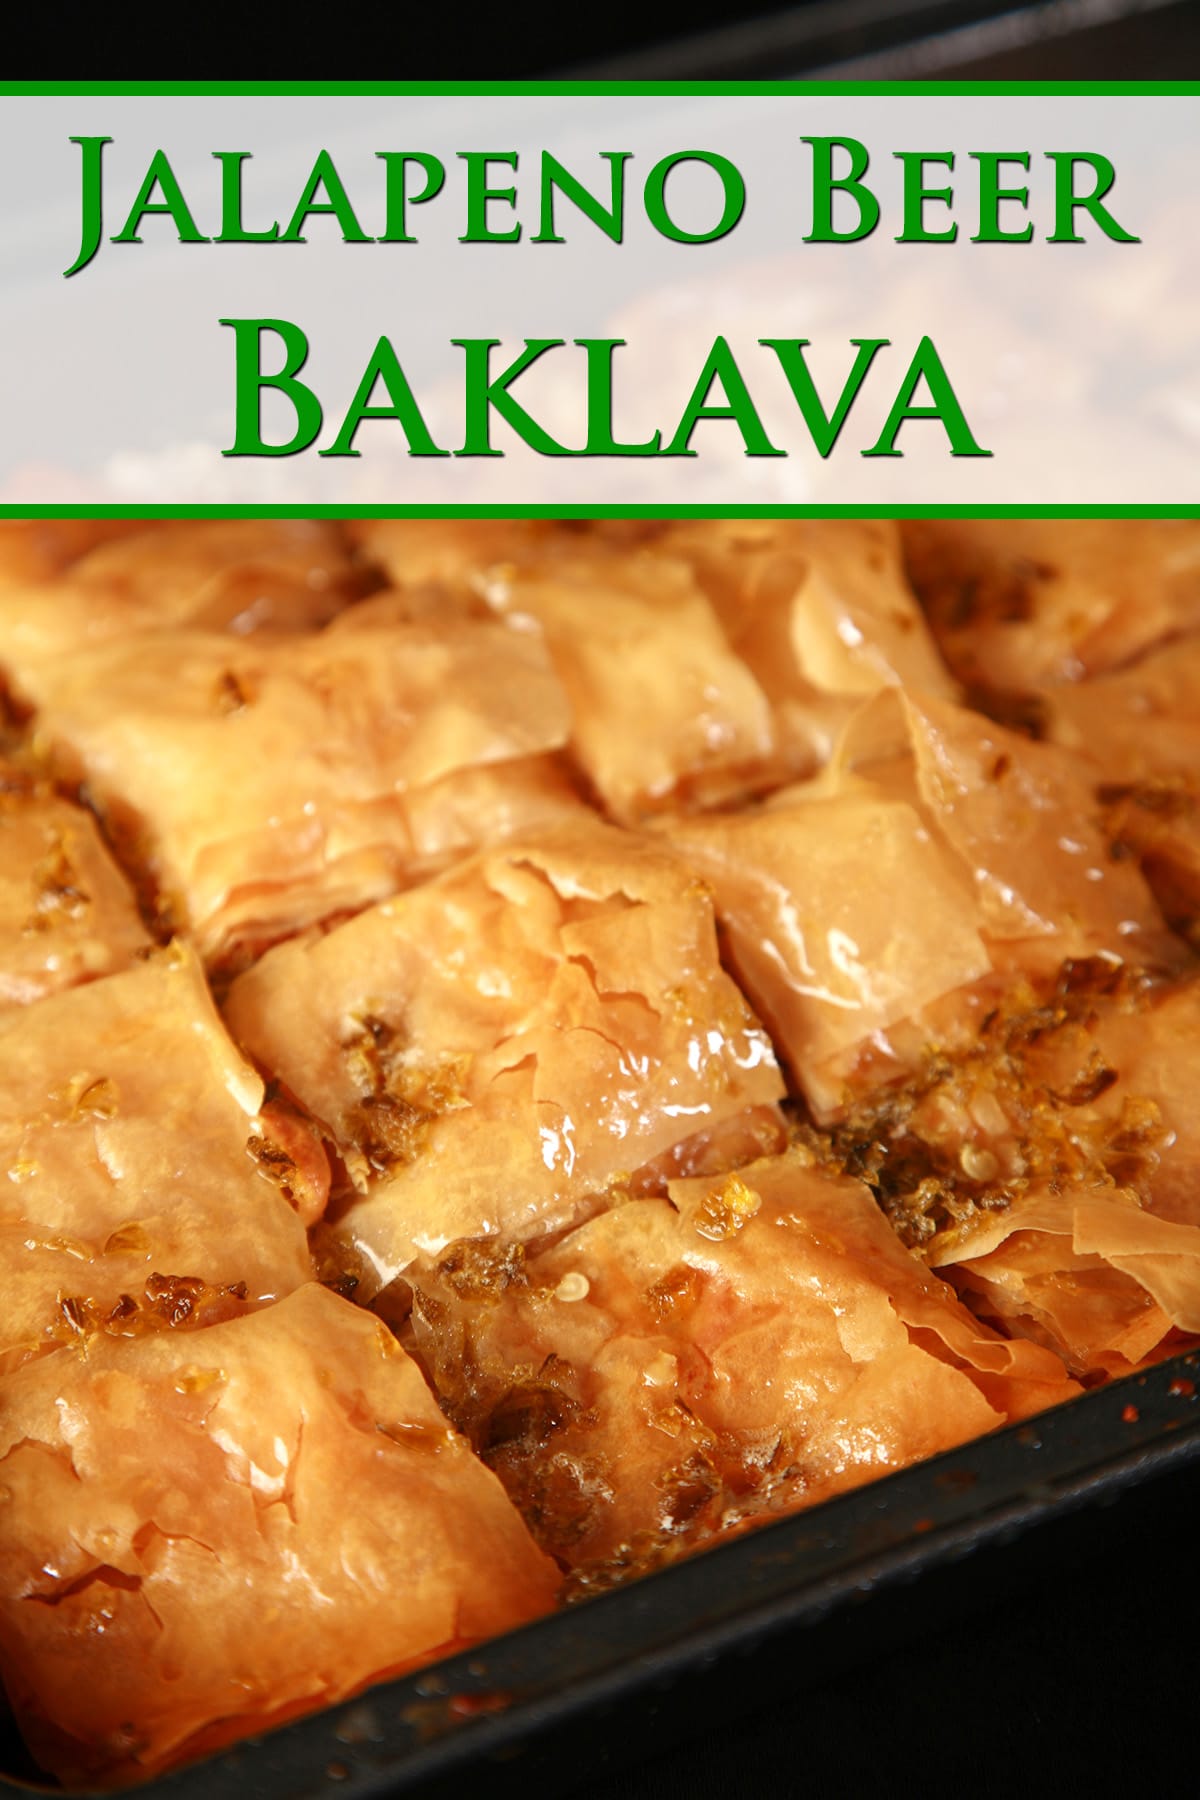 A close up view of a pan of jalapeno beer baklava, cut into squares.